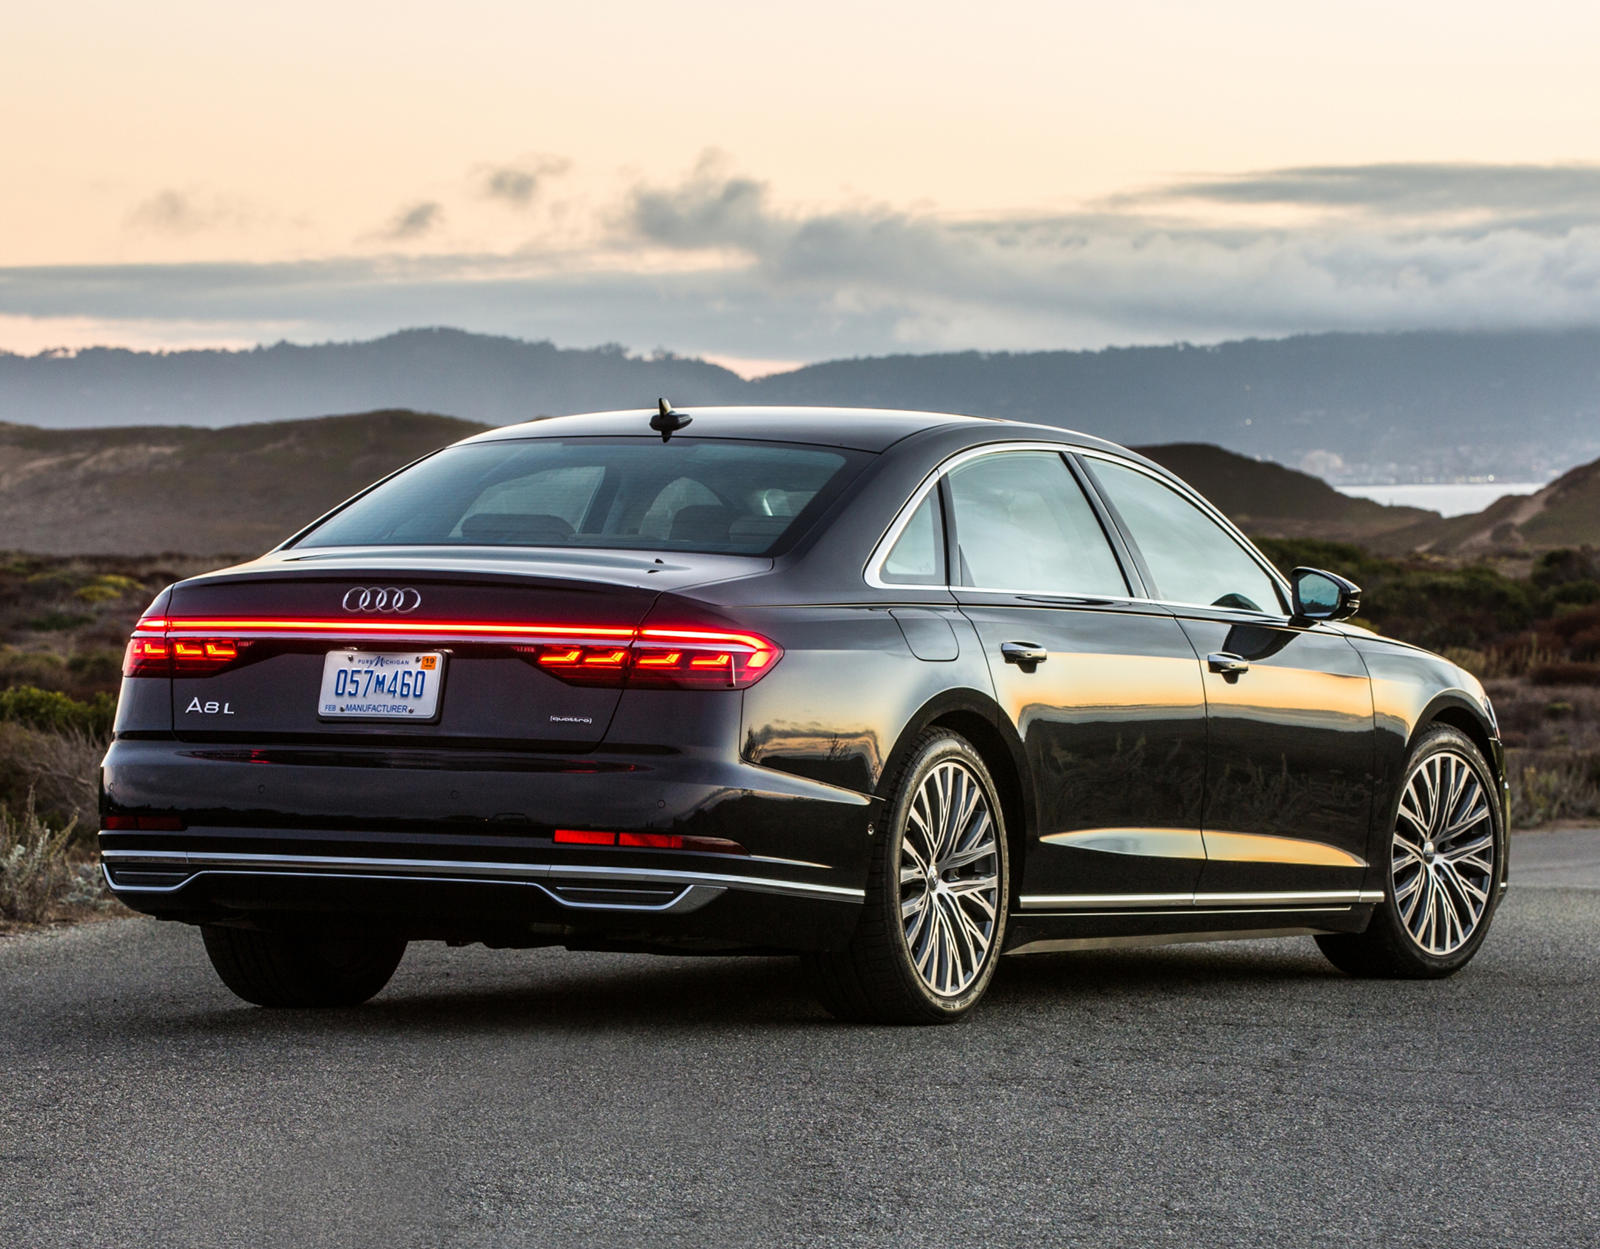 Meet The Audi A8 L Security The Ultimate Armored Luxury Sedan Carbuzz